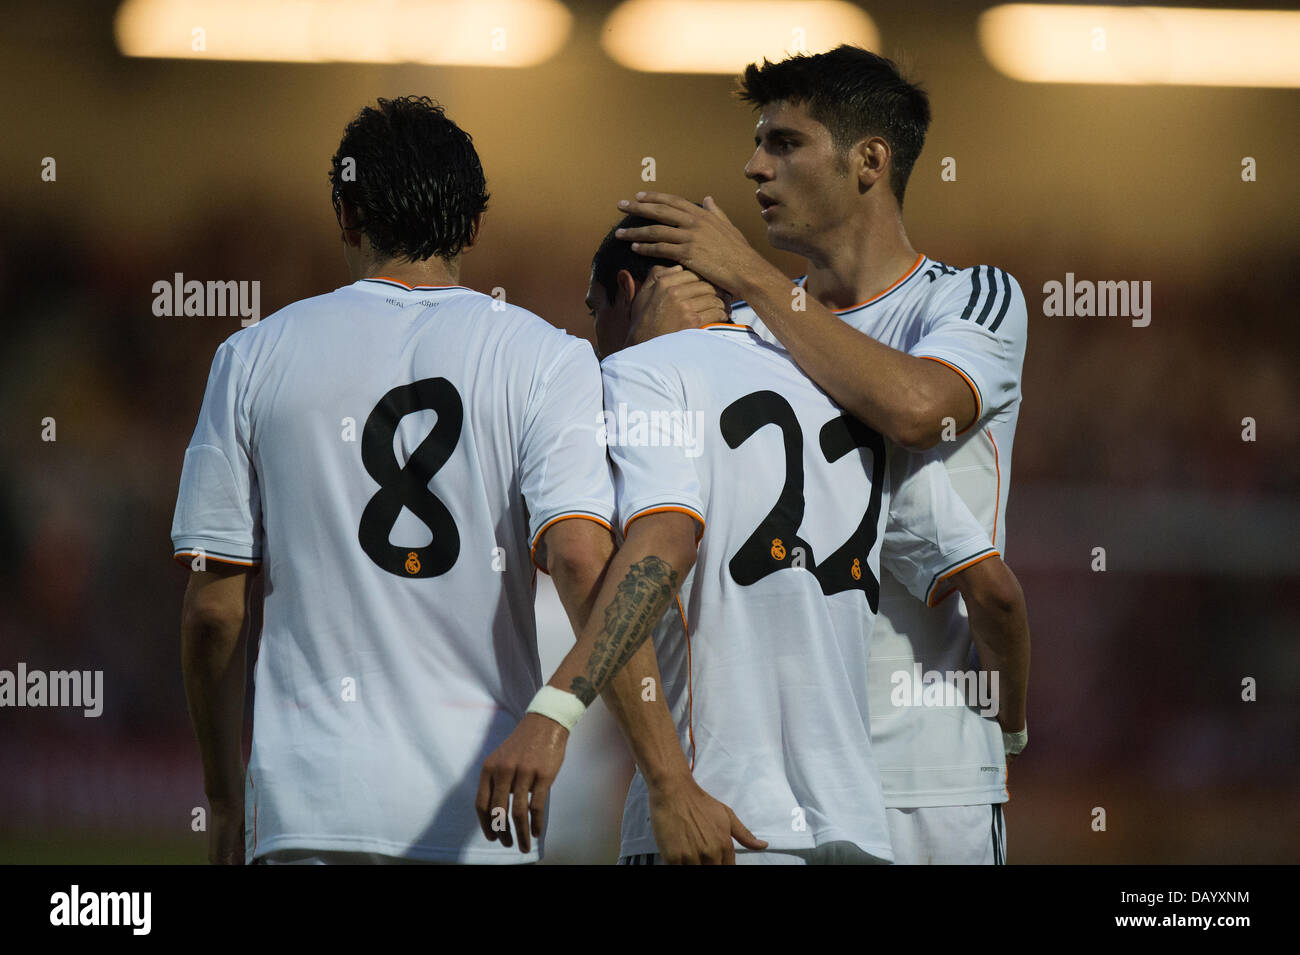 Bournemouth, UK. 21st July, 2013. Bournemouth AFC vs Real Madrid - Sunday 21st July 2013. Bournemouth, UK. Angel di Maria is congratulated by Kaka after scoring to make it 5-0 for Real Madrid. Credit:  MeonStock/Alamy Live News Stock Photo